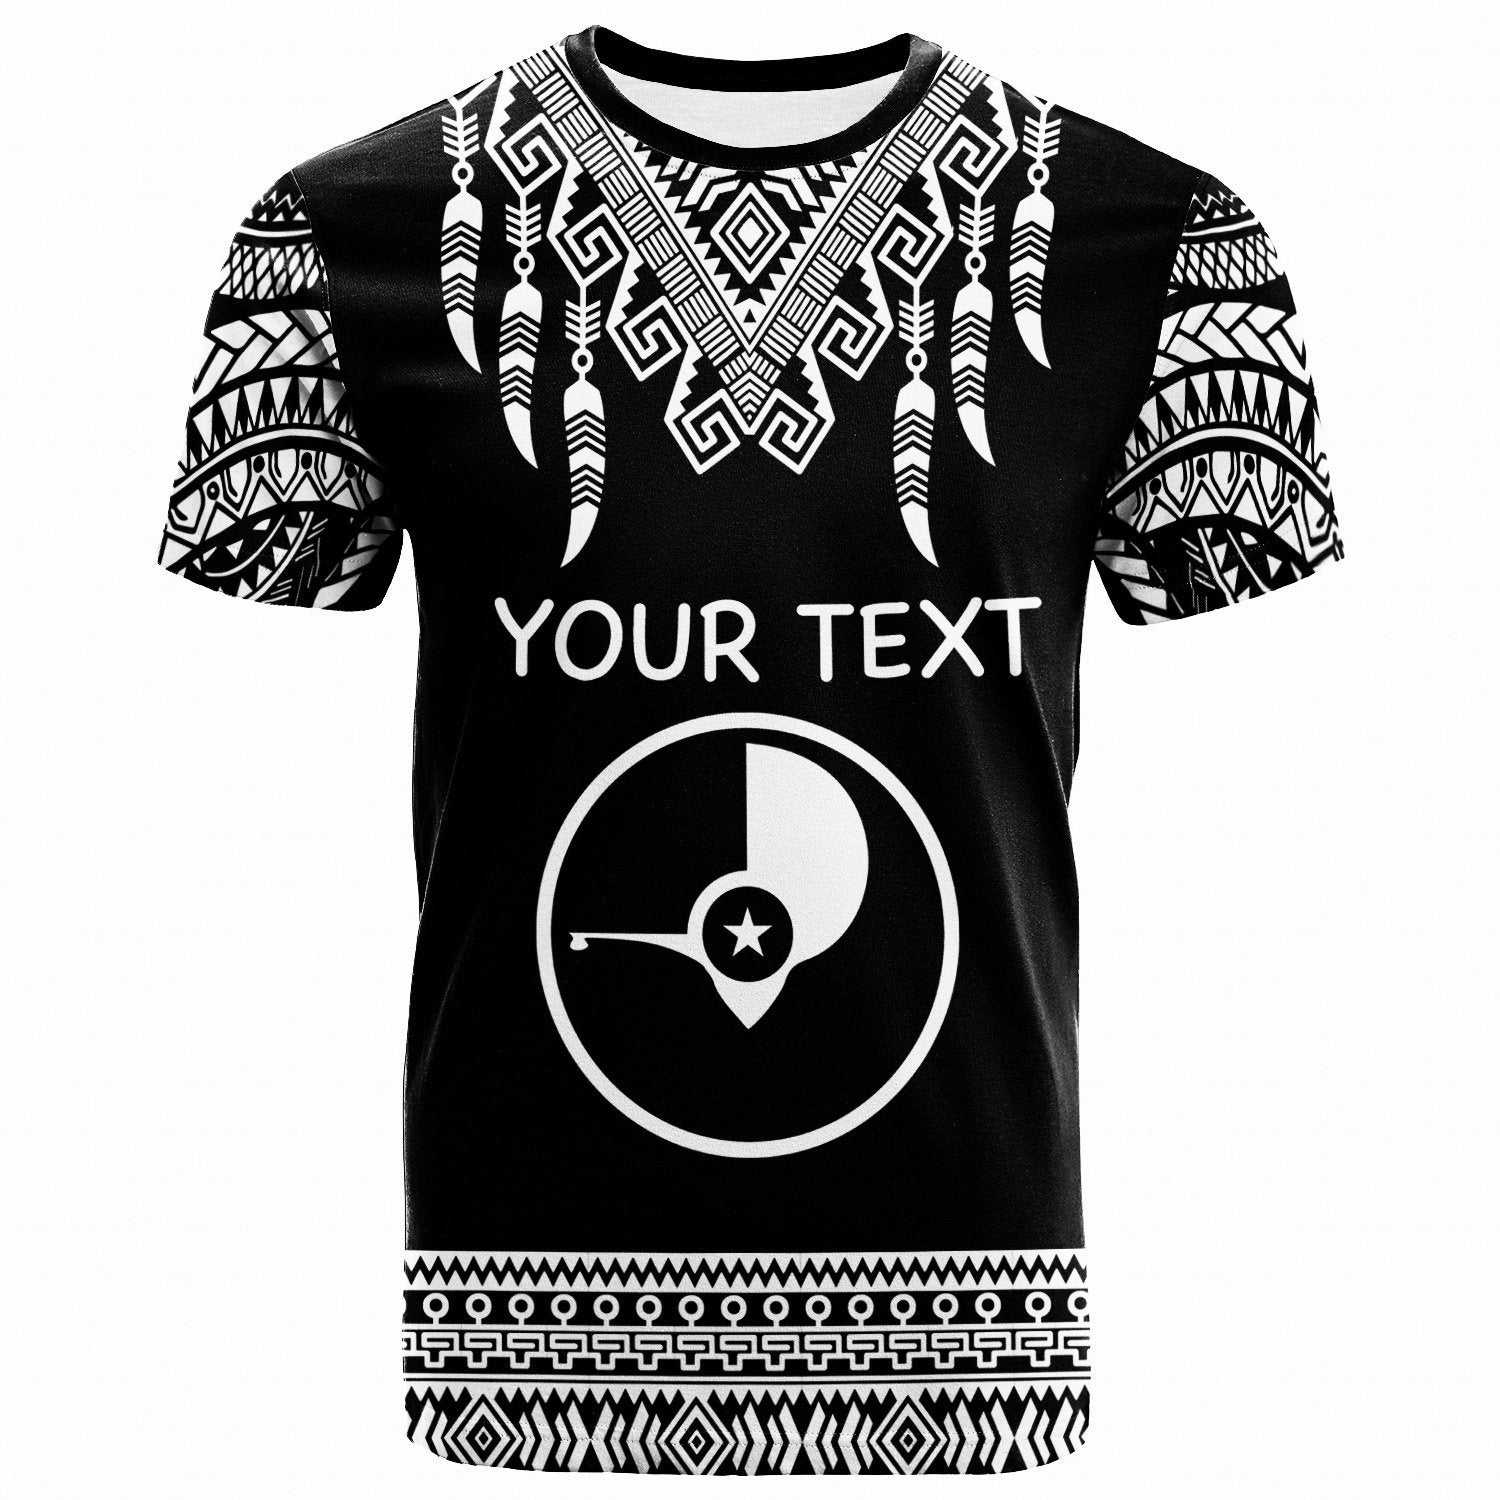 yap-custom-personalised-t-shirt-tooth-shaped-necklace-pattern